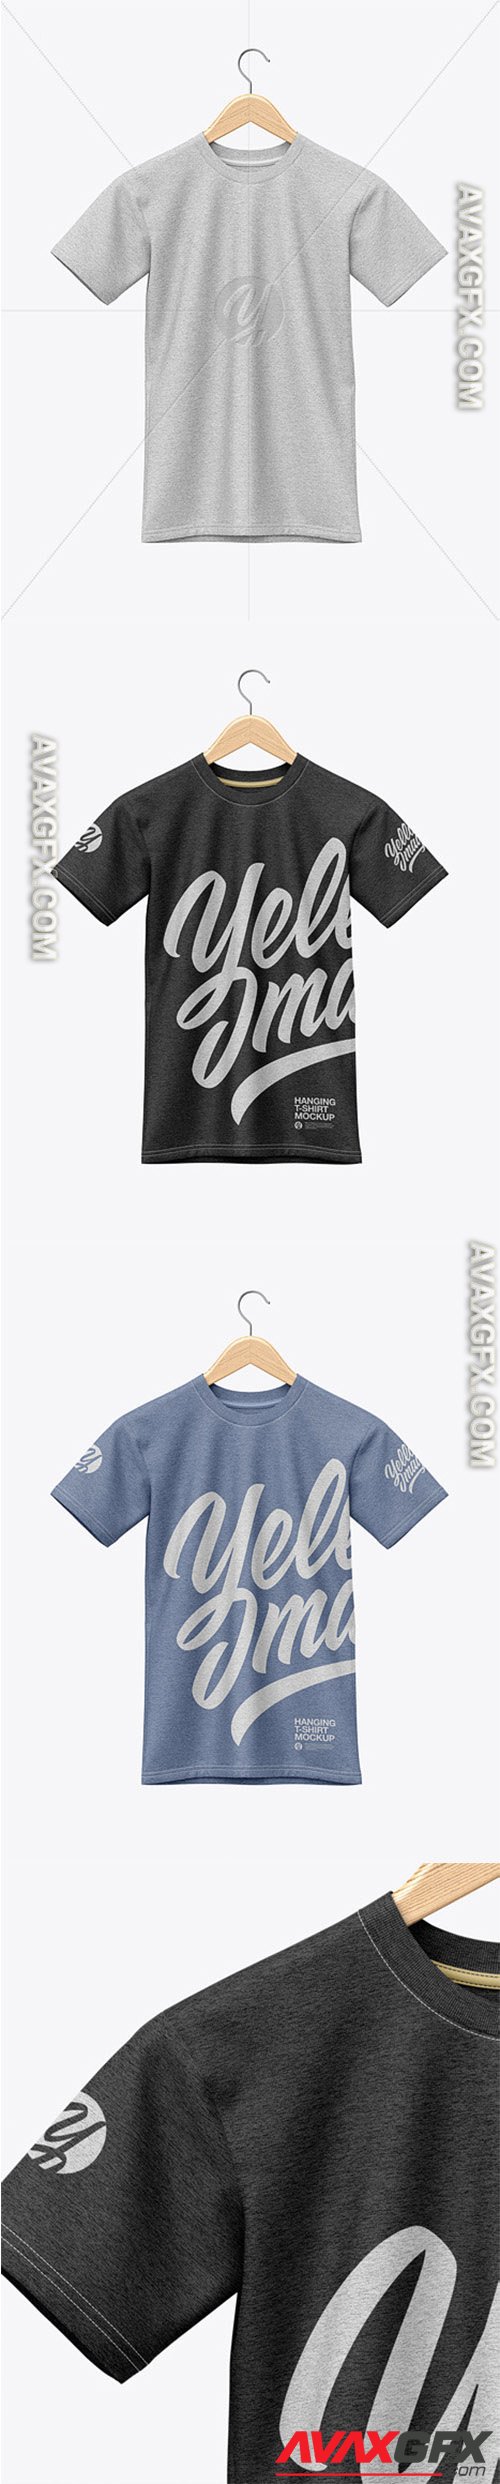 Heather Hanging T-Shirt Mockup - Front View 49559